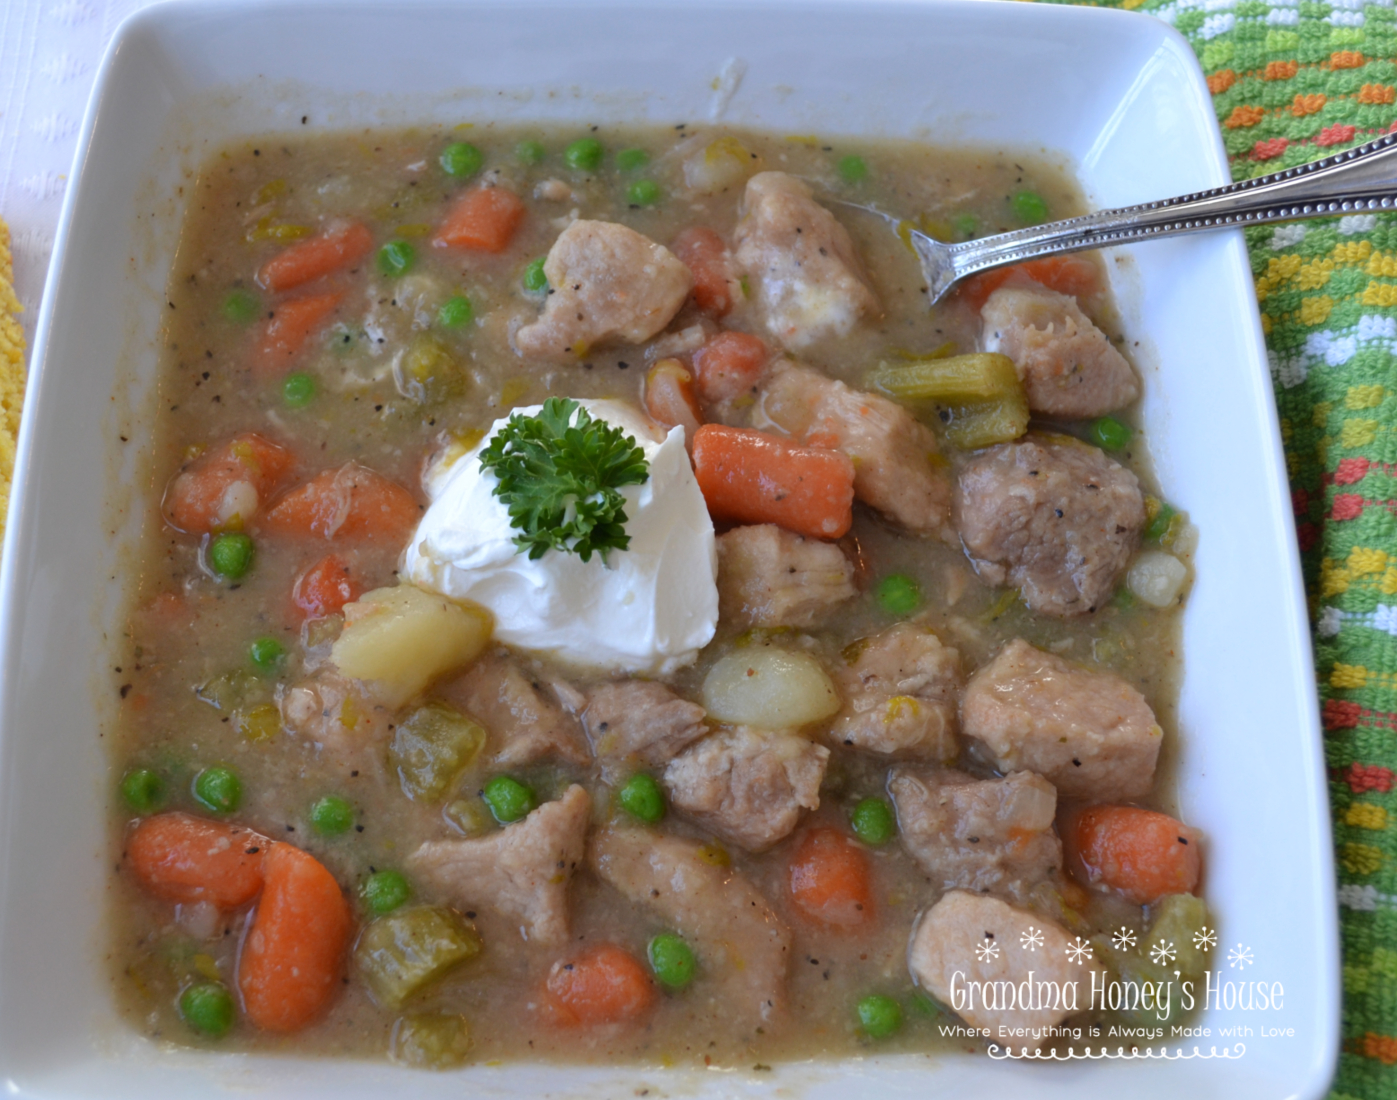 Pork Stroganoff Stew is a delicious, hearty stew loaded with tender pork cubes,veggies,a perfect blend of seasonings and topped with sour cream.